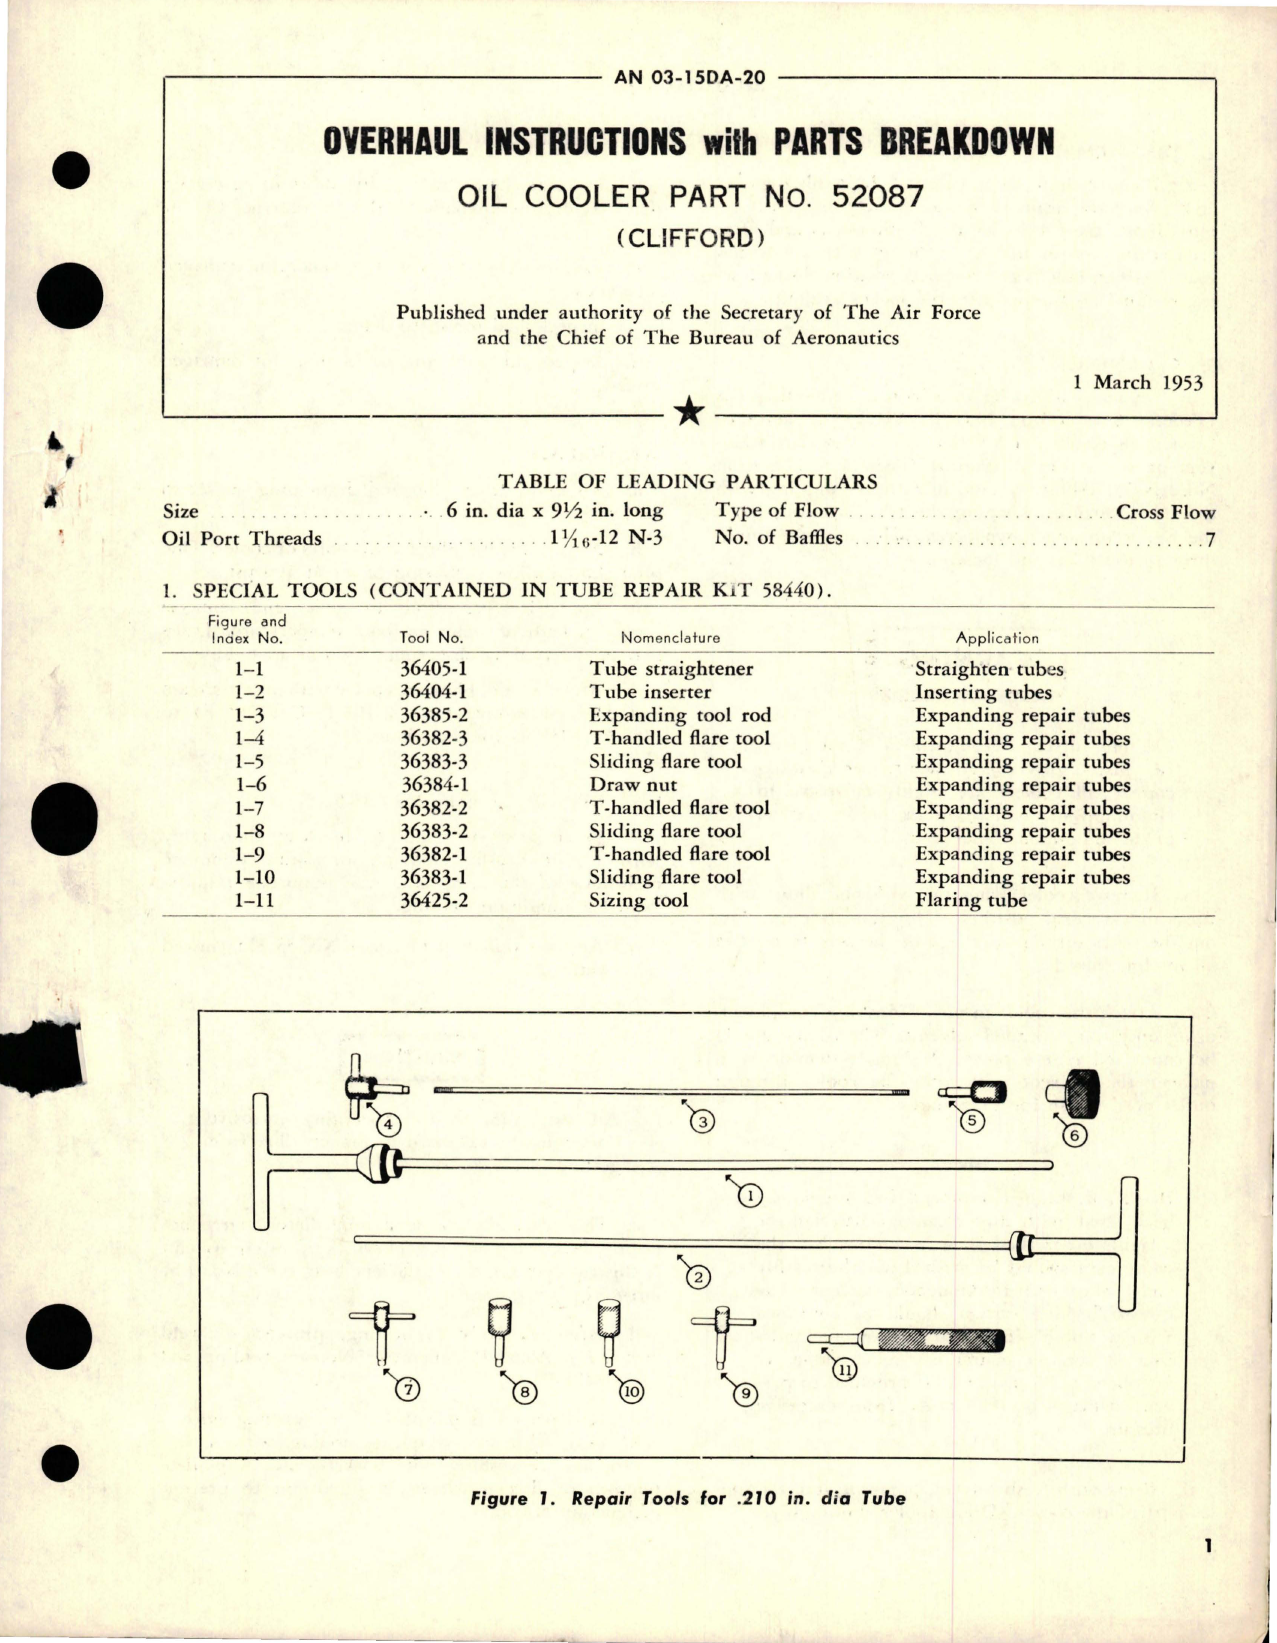 Sample page 1 from AirCorps Library document: Overhaul Instructions with Parts for Oil Cooler - Part 52087 